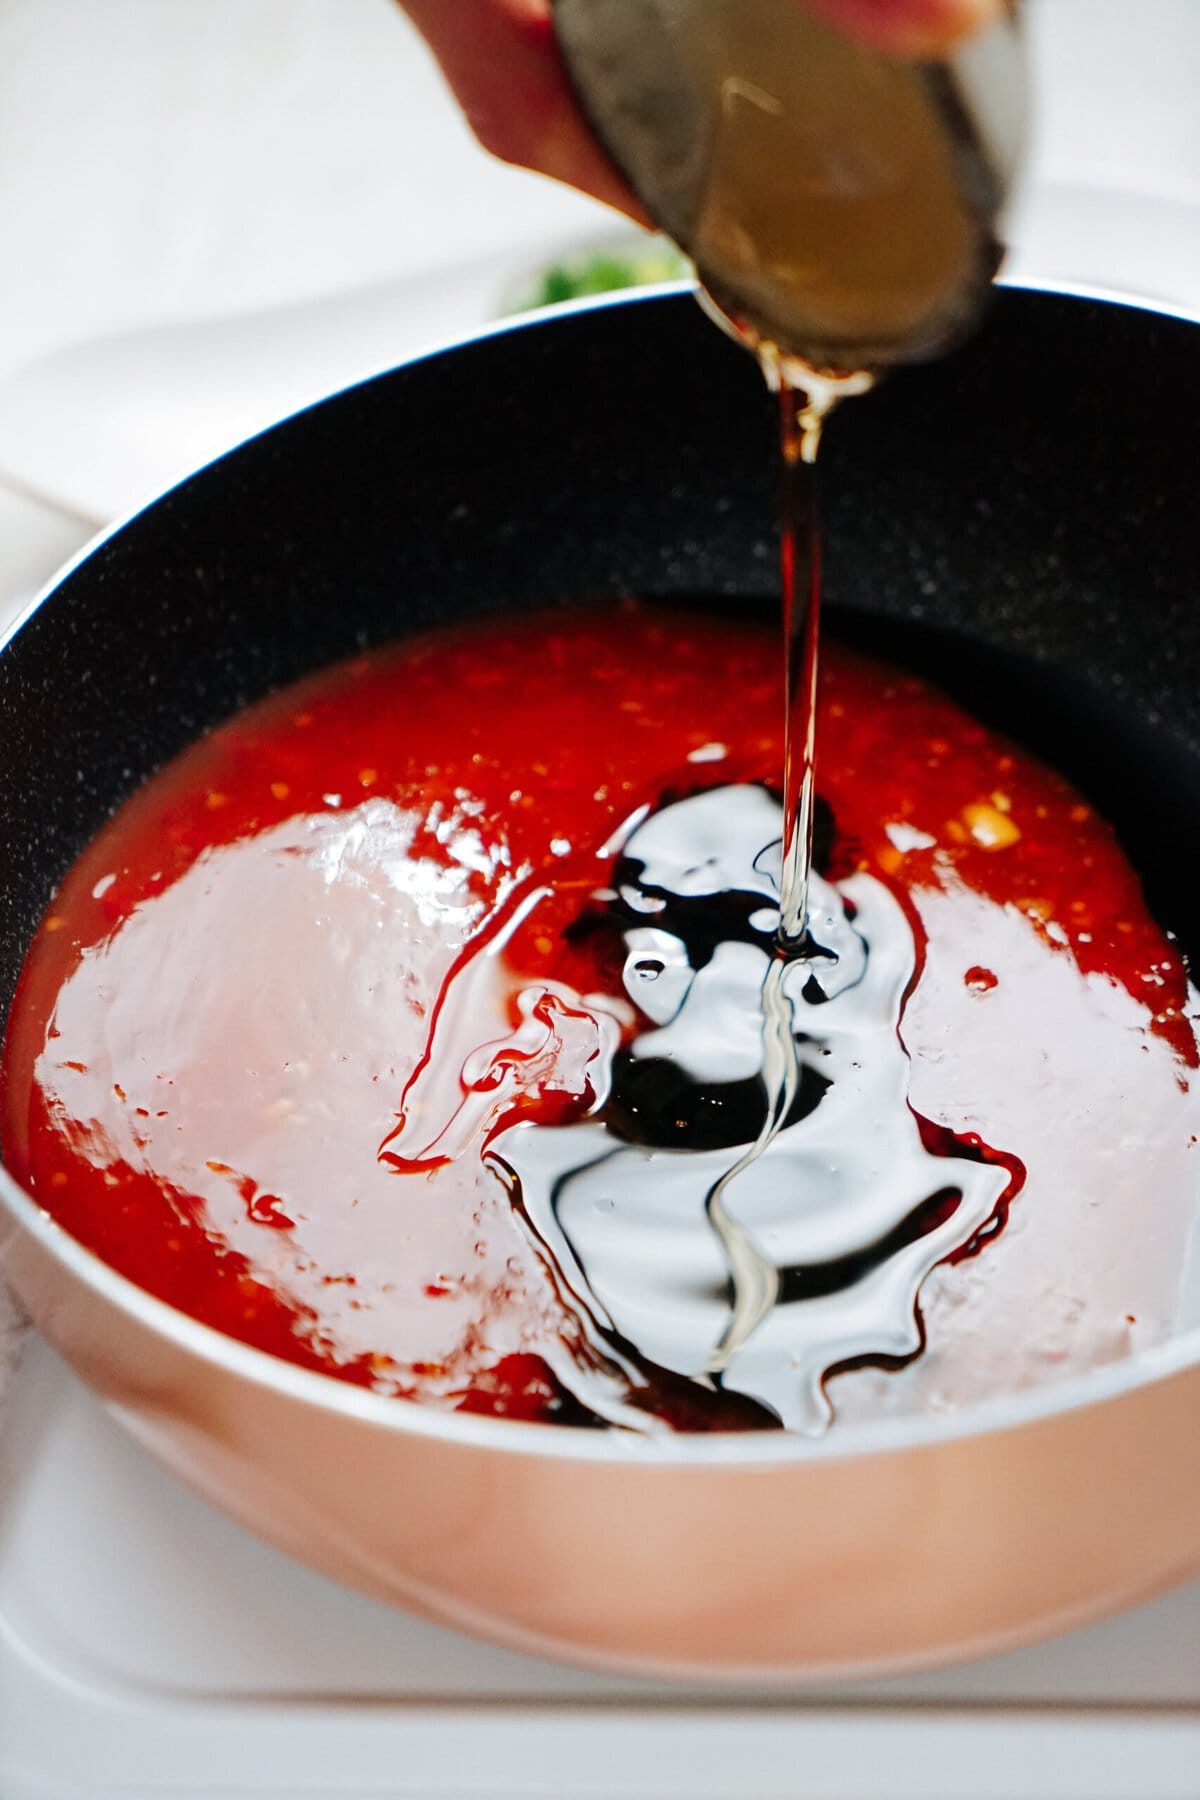 A hand is pouring a liquid ingredient into a pan filled with a red sauce.